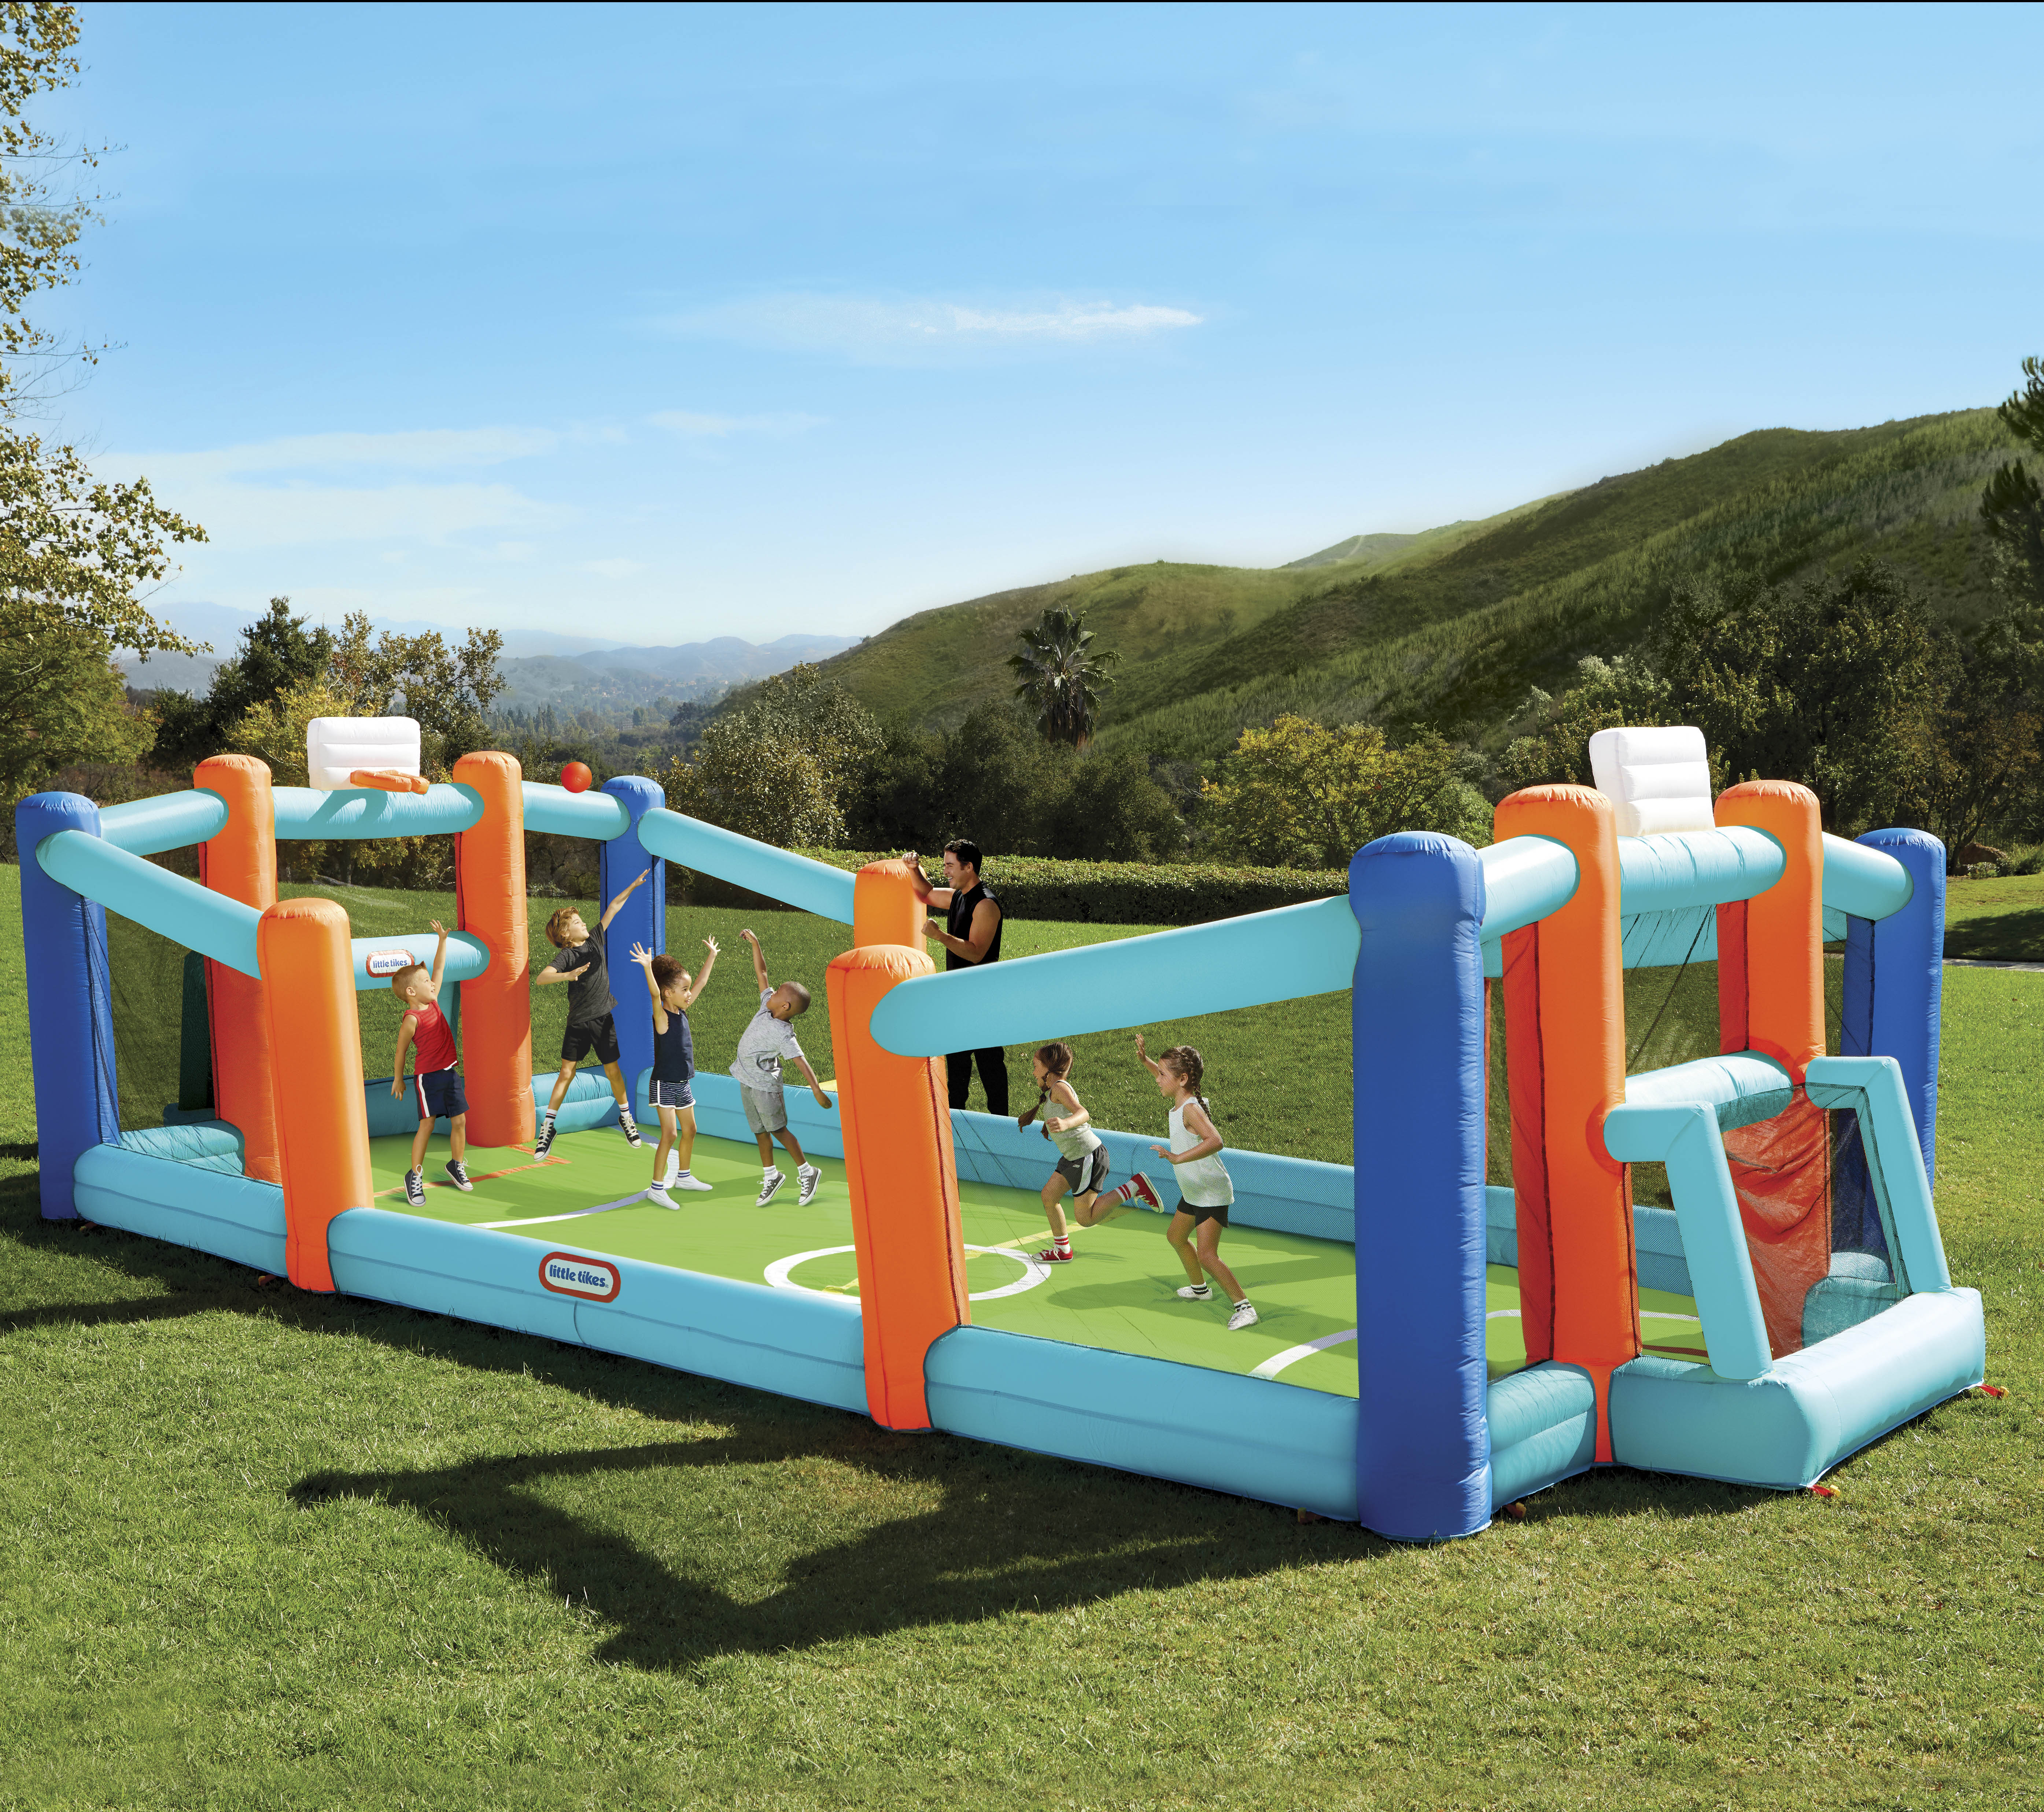 Little Tikes Huge 24' L x 12' W x 7' H Inflatable Sports Bouncer Backyard Soccer & Basketball Court and Blower, Fits up to 8 Kids, Outdoor Sports Toy Kids Boys Girls Ages 3-8 - image 1 of 5